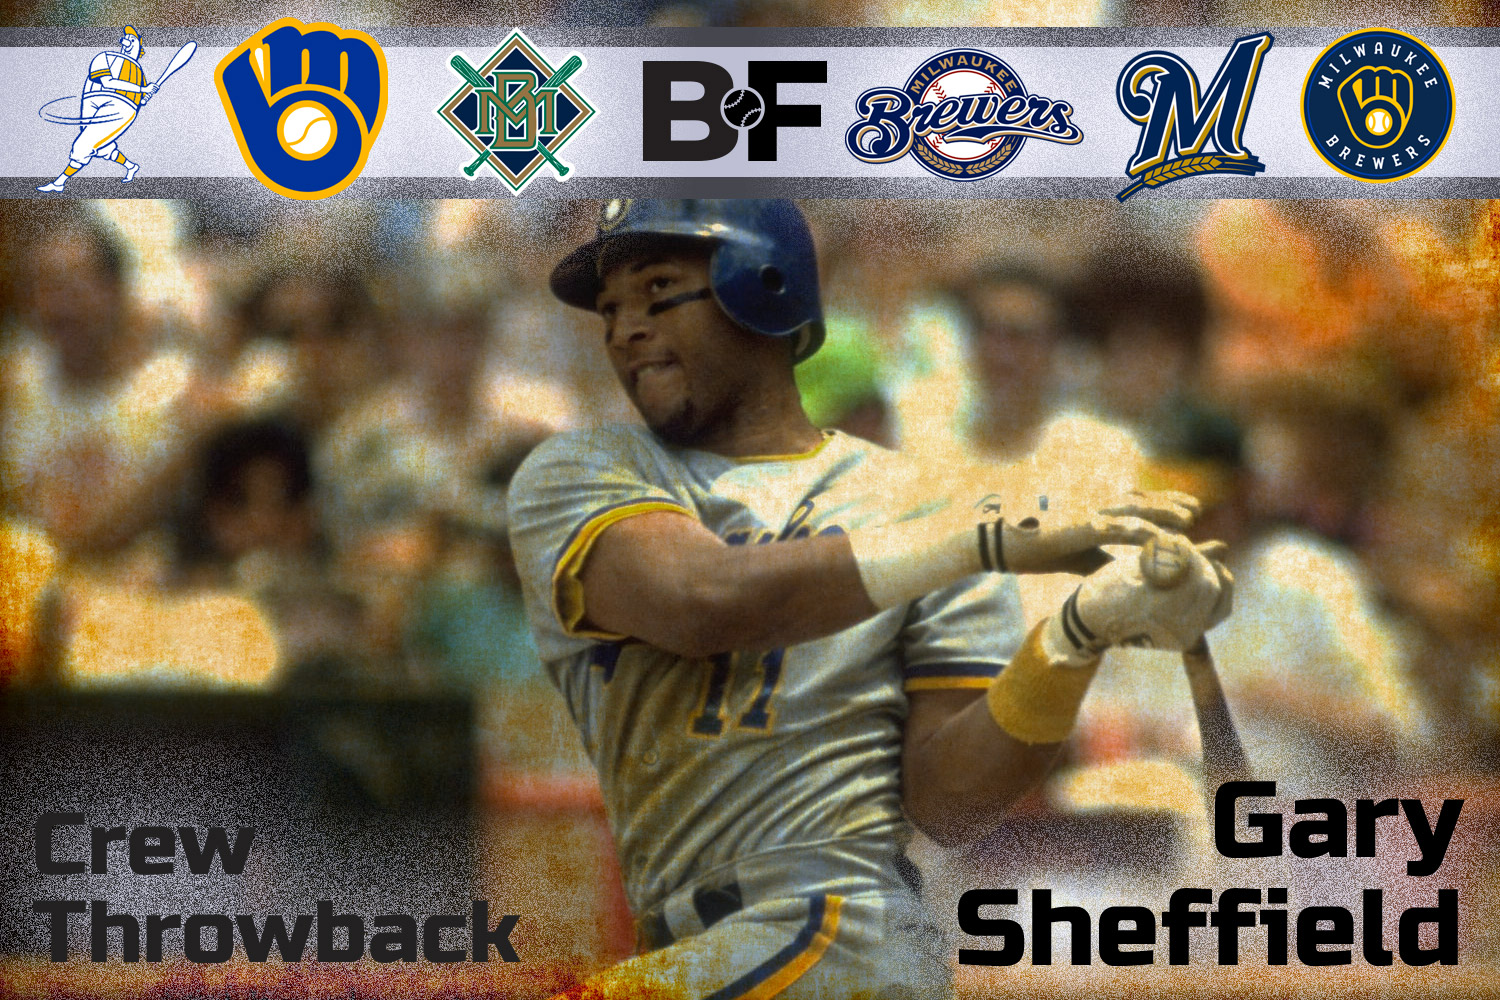 Hall of Fame: Gary Sheffield has credentials, but PED links